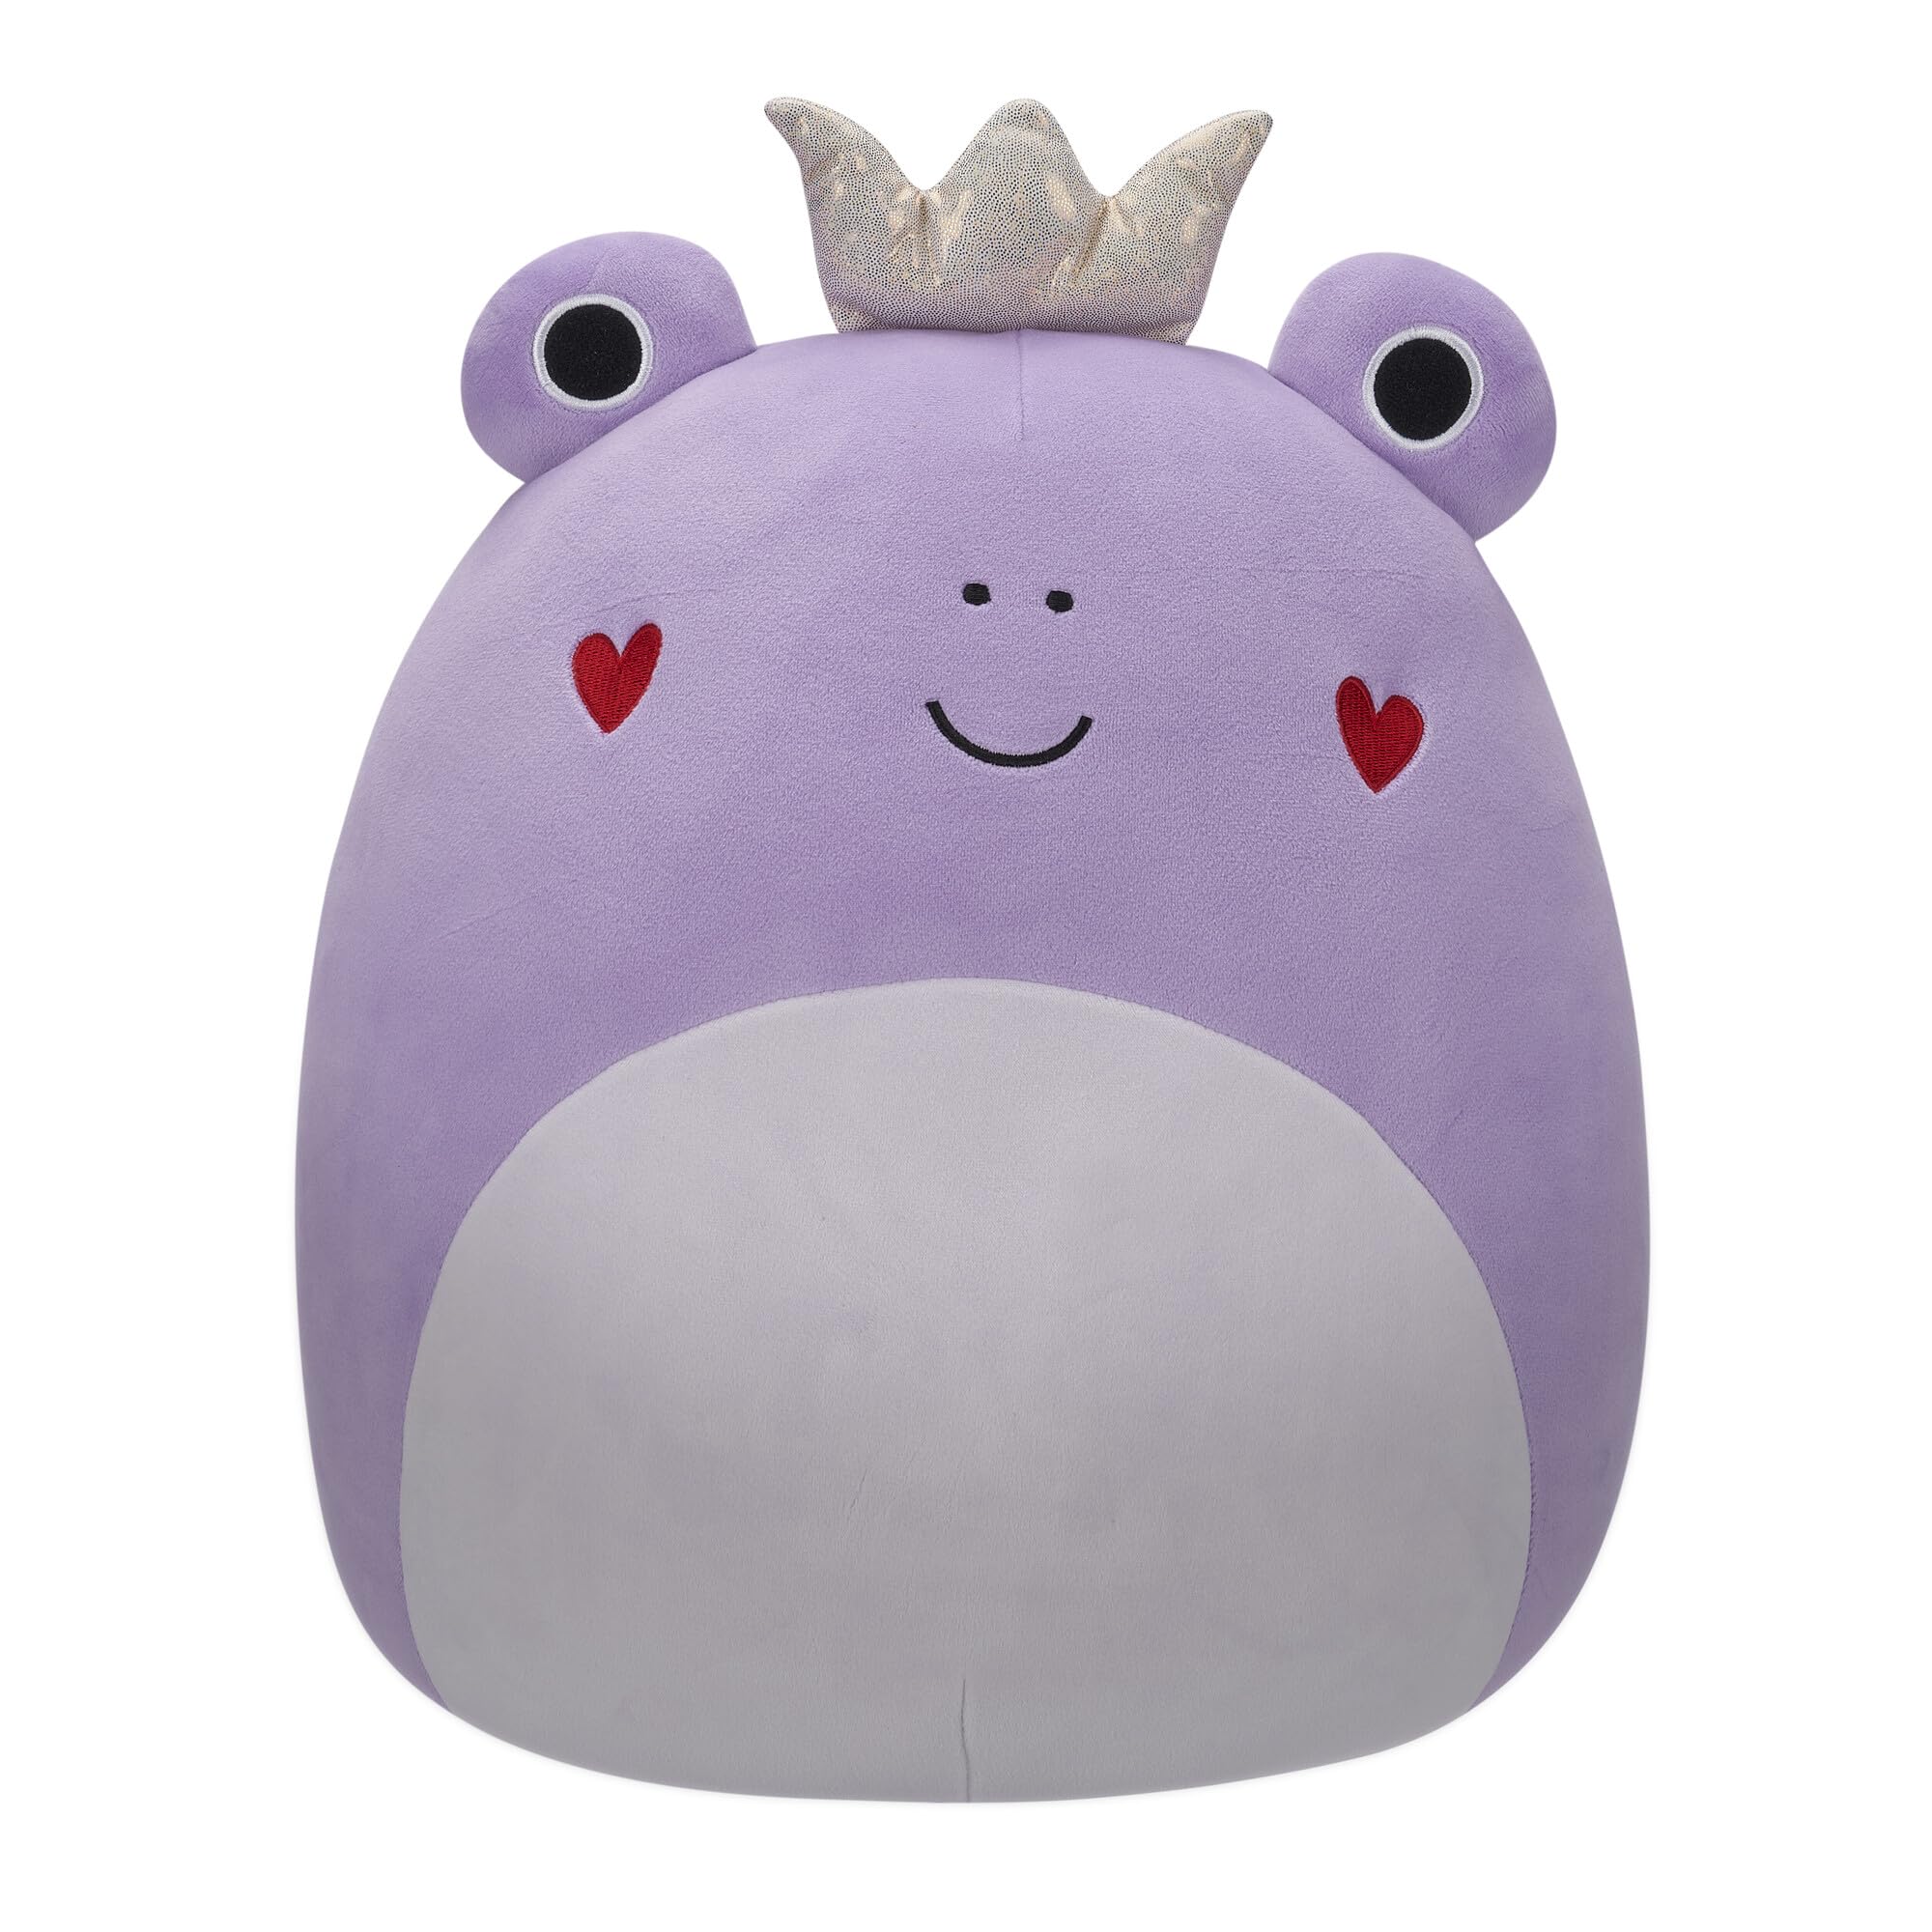 Squishmallows Original 14-Inch Francine Purple Frog with Heart Cheeks and Gold Crown - Official Jazwares Large Plush